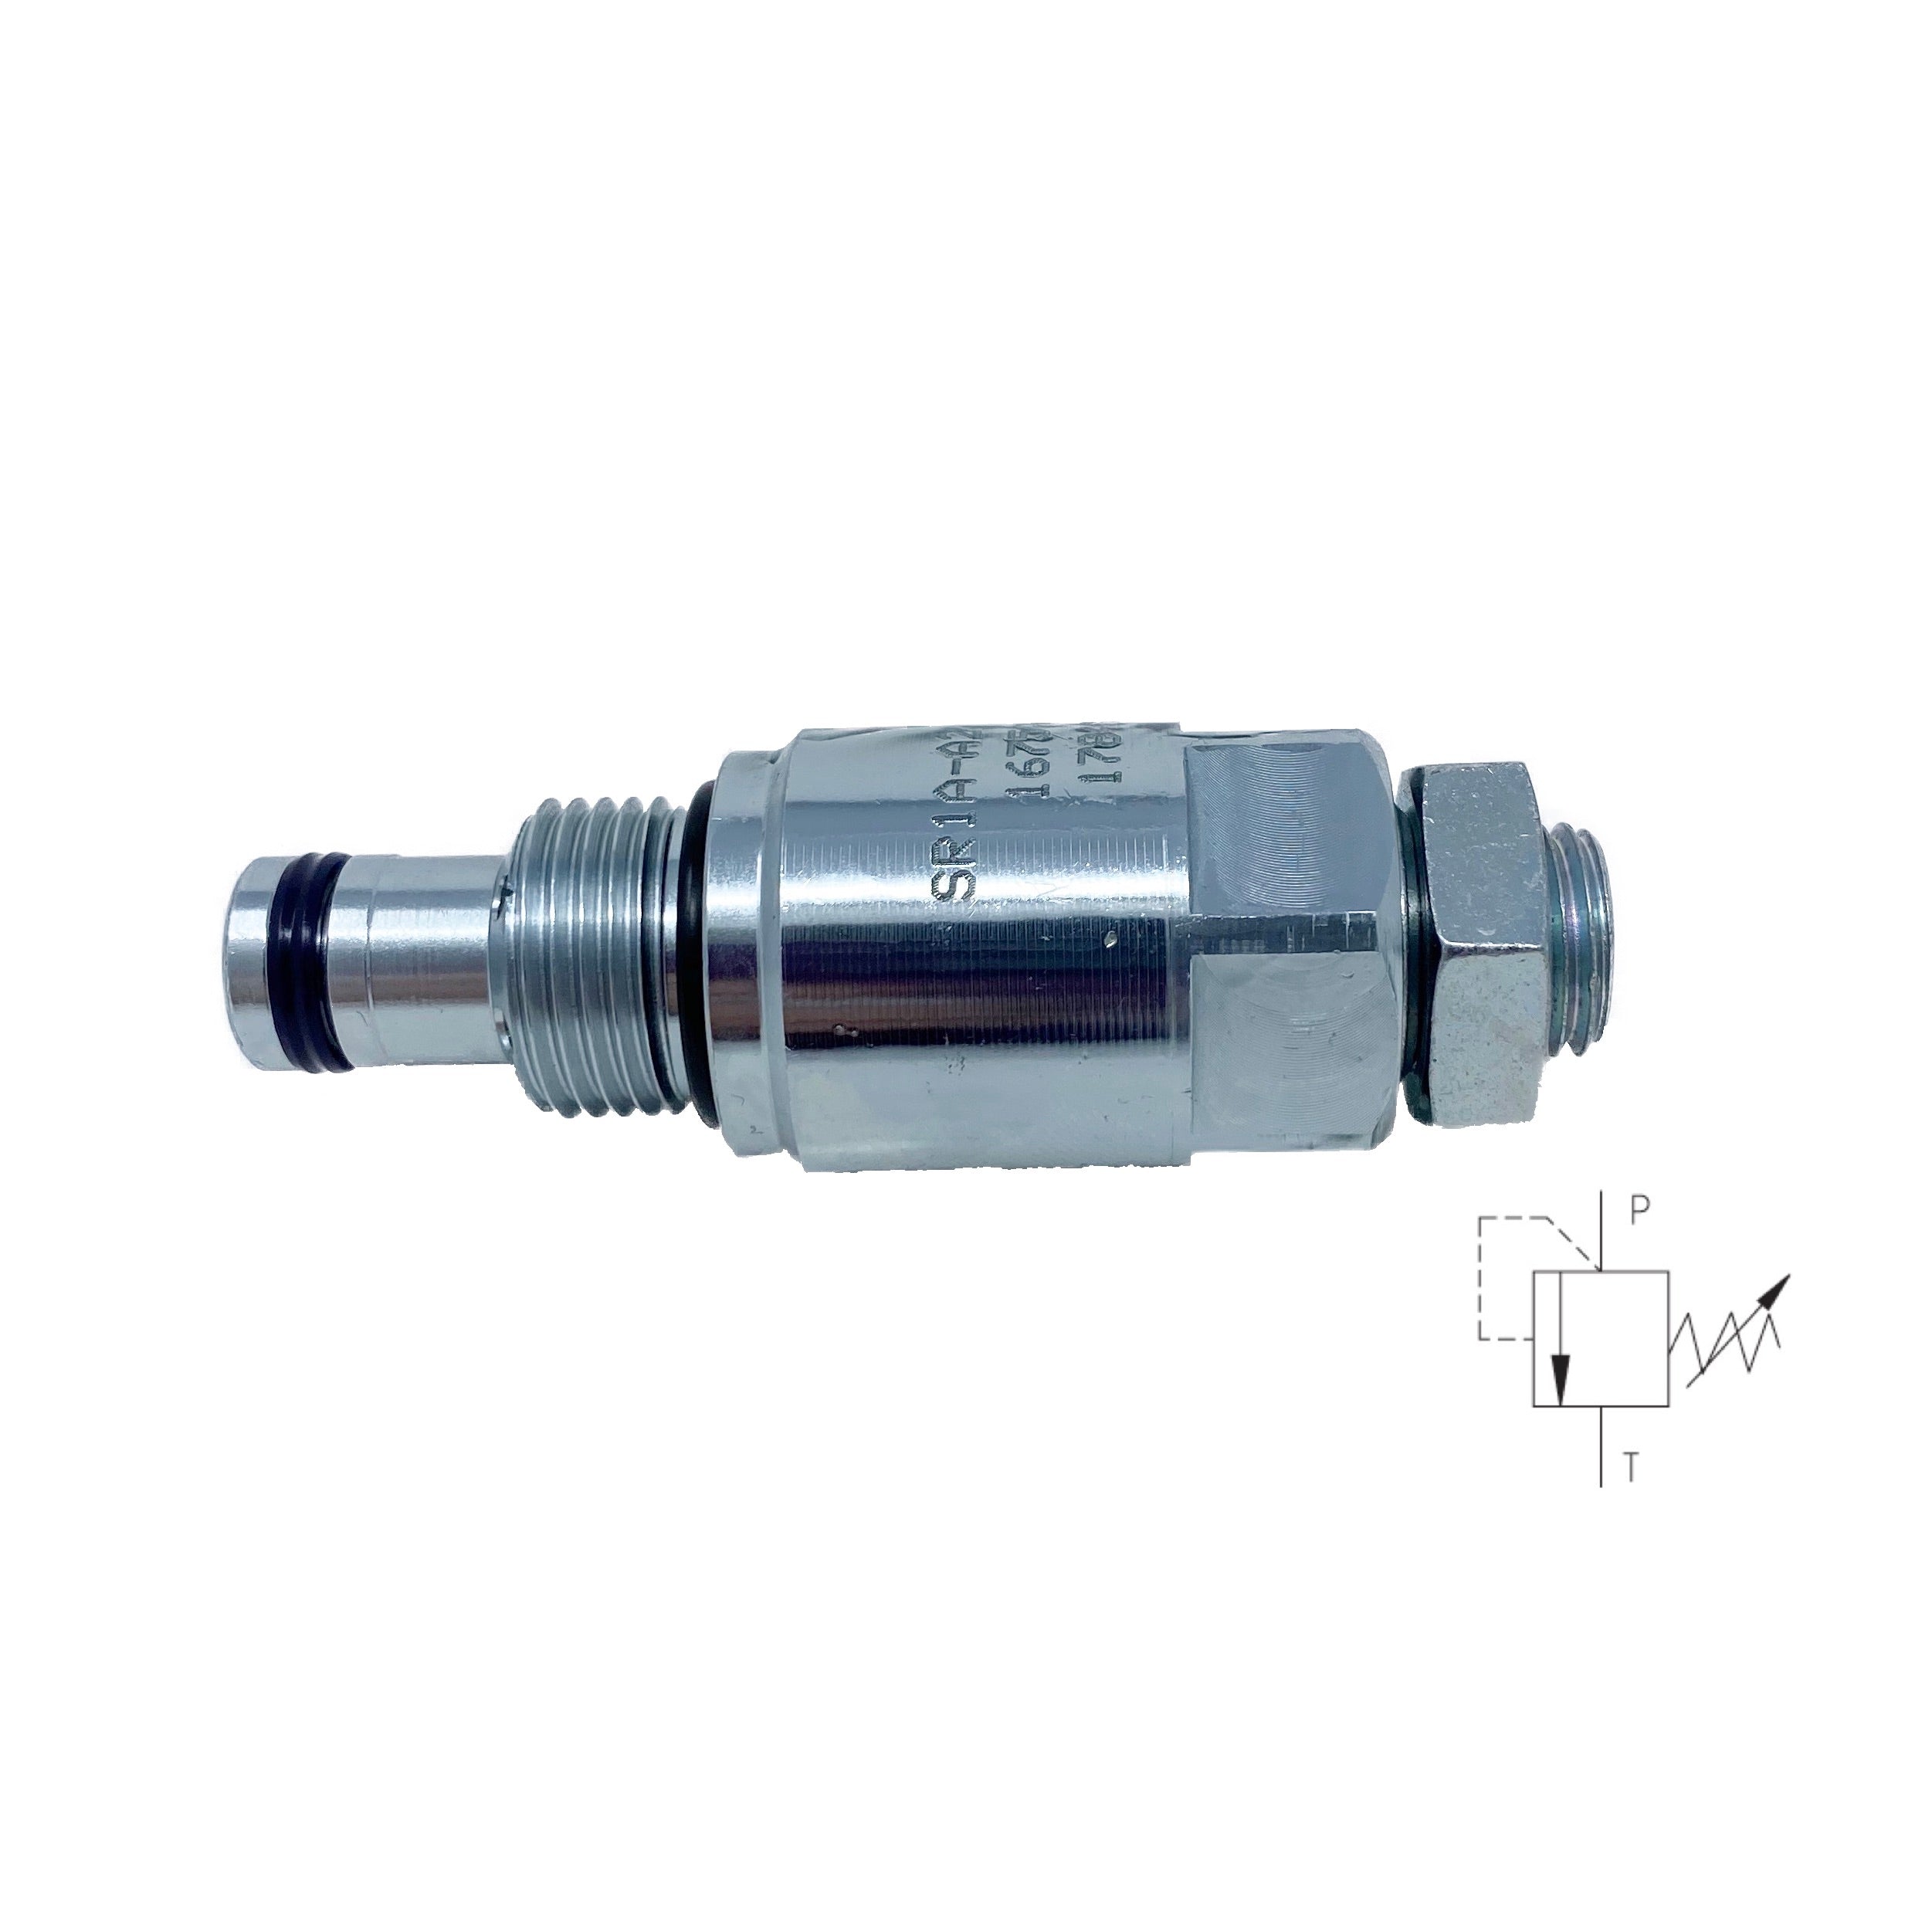 SR1A-A2/L10S-A : Argo Relief, Poppet Type, Direct Acting, 8 GPM, 5100psi, Allen Key, Range to 1450psi, C-8-2 Cavity